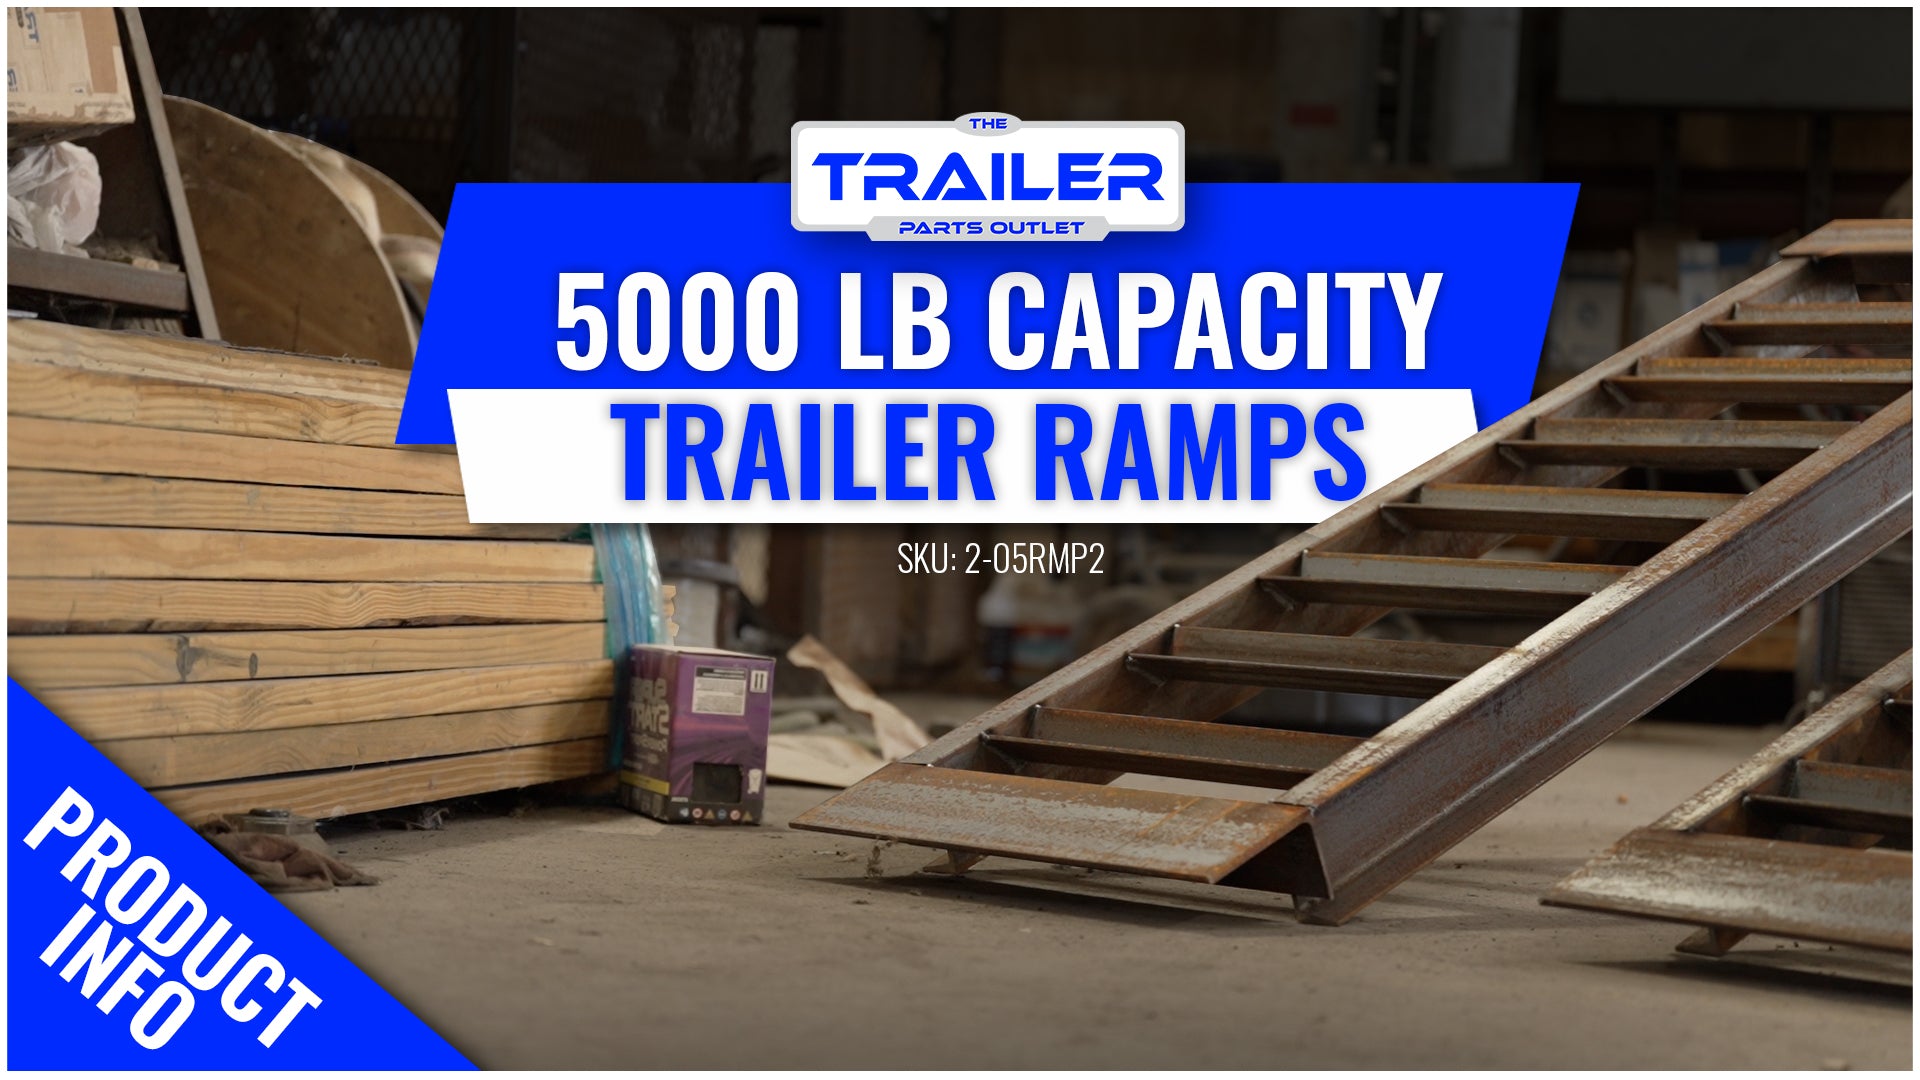 Pair of 2" Angle Iron Steel Loading Ramps (5,000 lb Capacity) Product Video -  2-05RMP2 - Product Overview Video  - The Trailer Parts Outlet - Nation Wide Shipping - National Trailer Parts Supplier